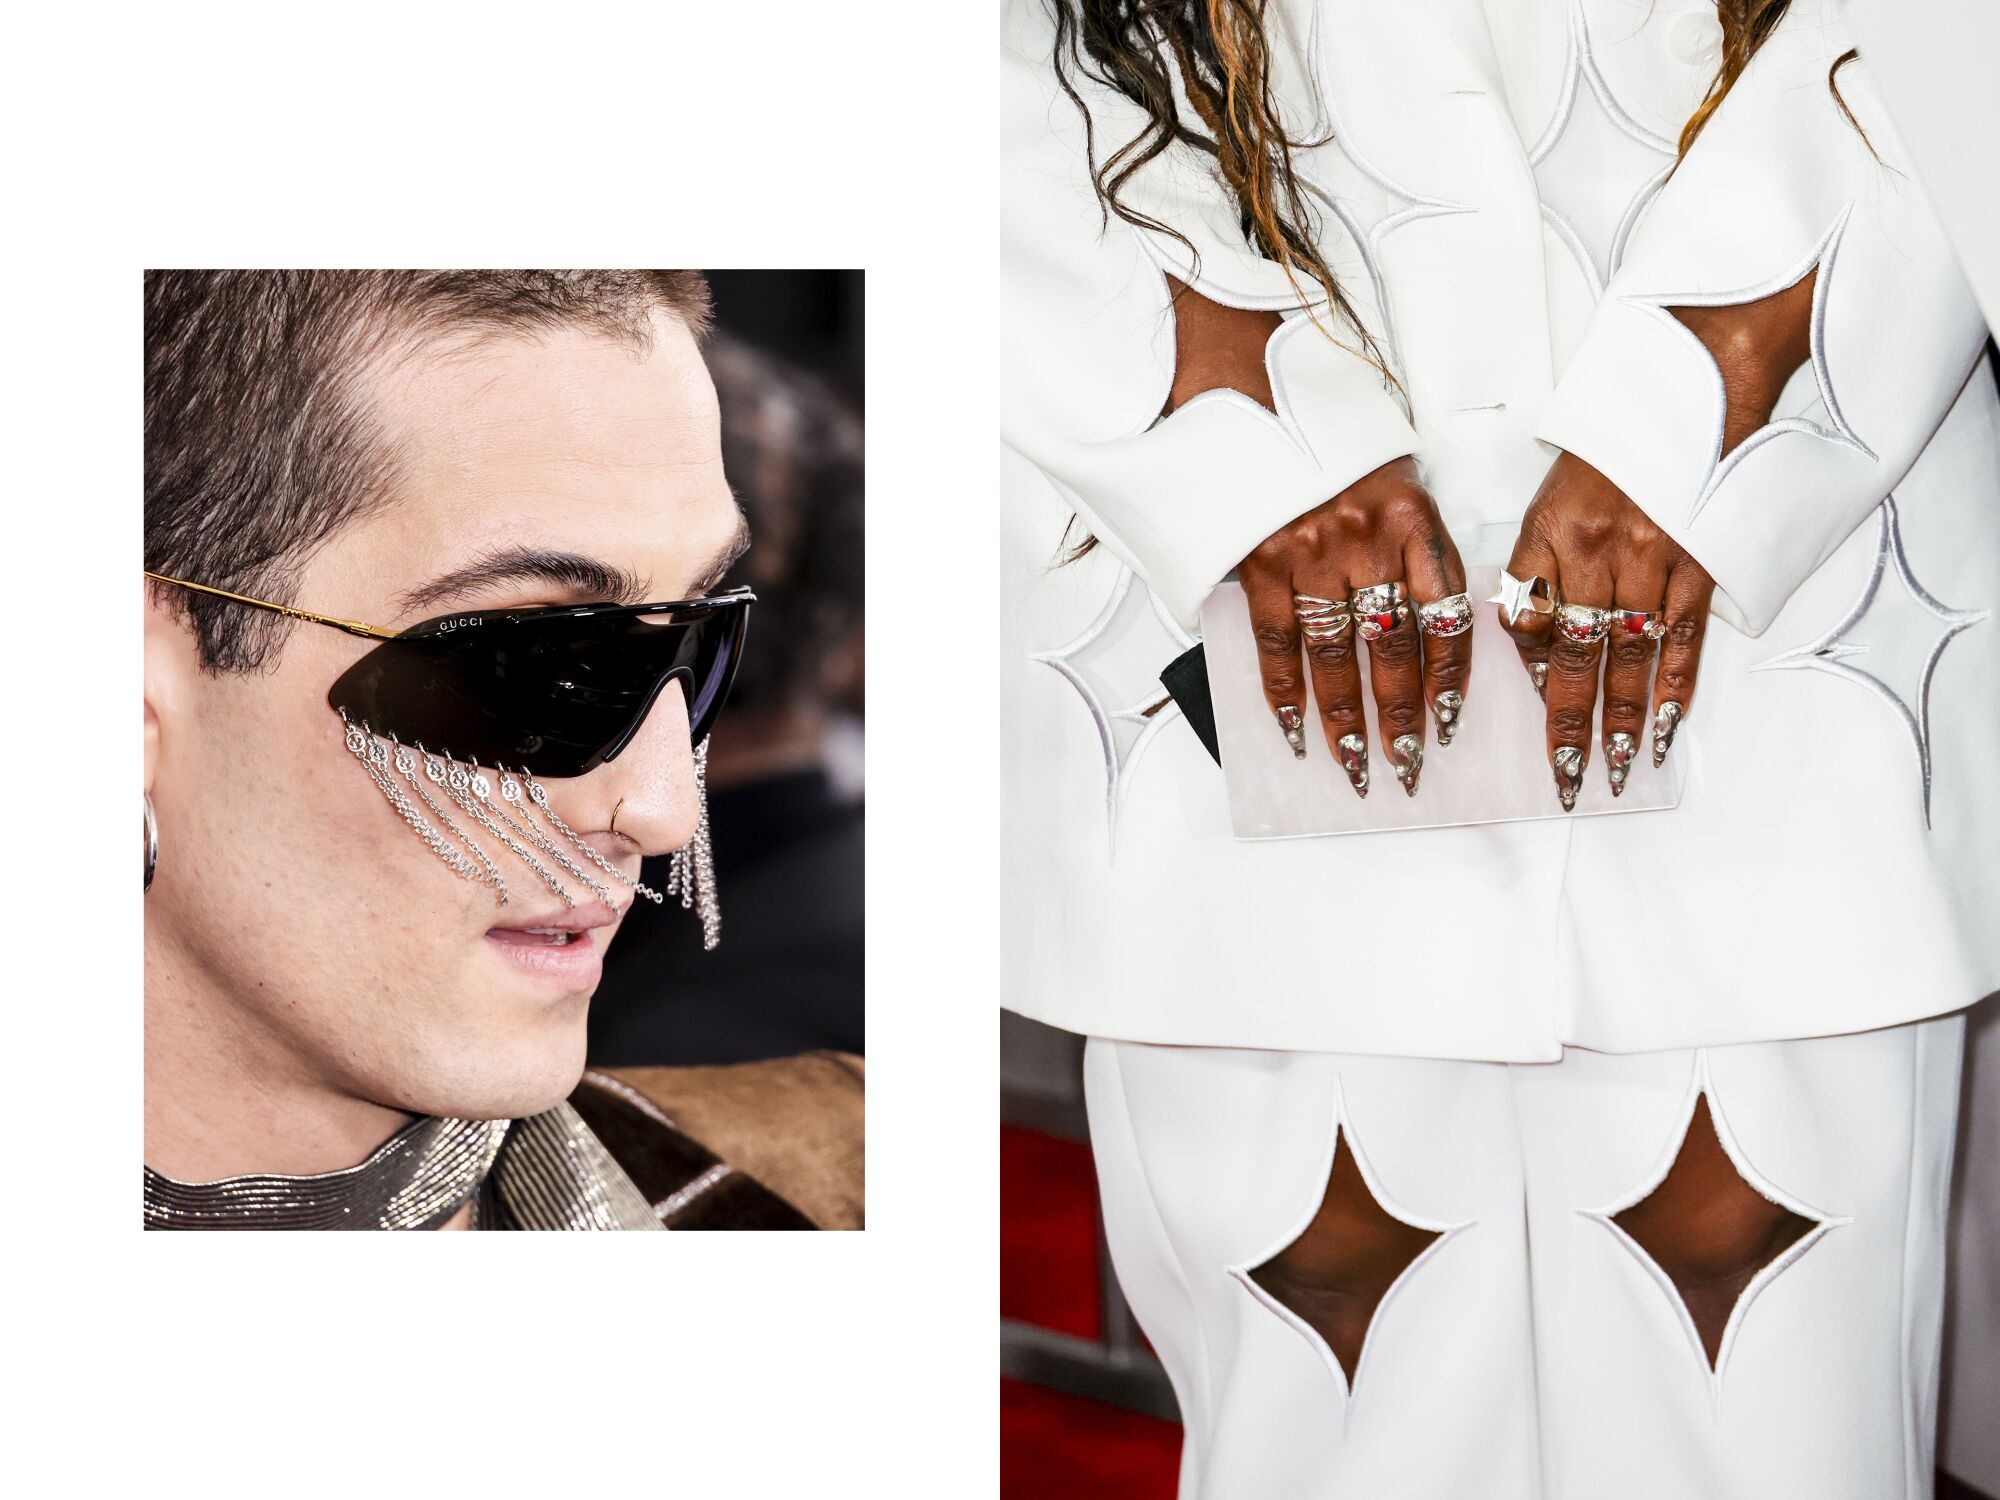 A facewith shades with chains hanging from them, and a torso with diamond cutouts in sleeves and pants and rings on hands